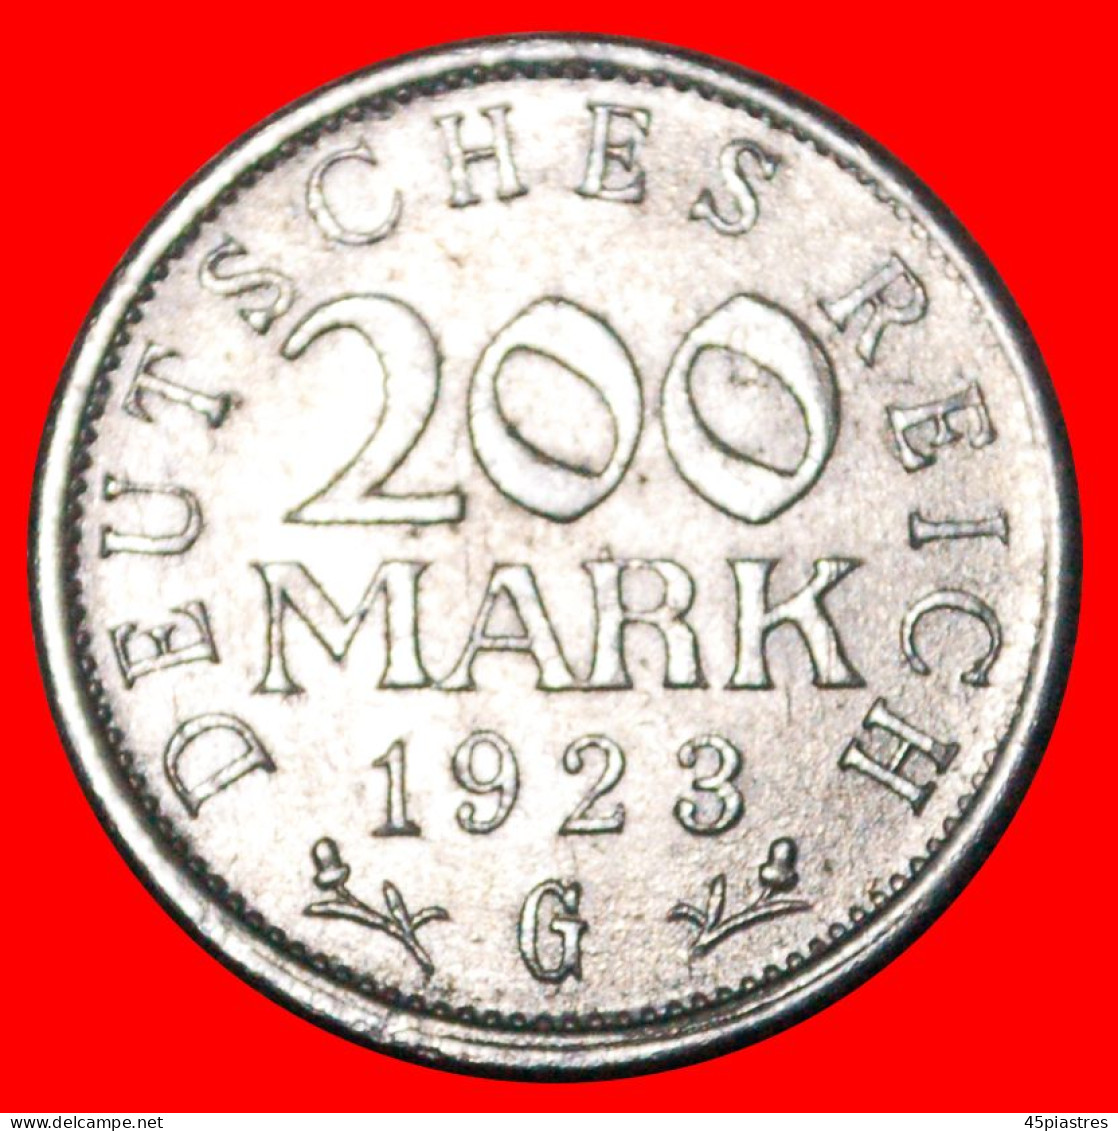 * INFLATION: GERMANY WEIMAR REPUBLIC  200 MARK 1923G! · LOW START! · NO RESERVE!!! - 200 & 500 Mark